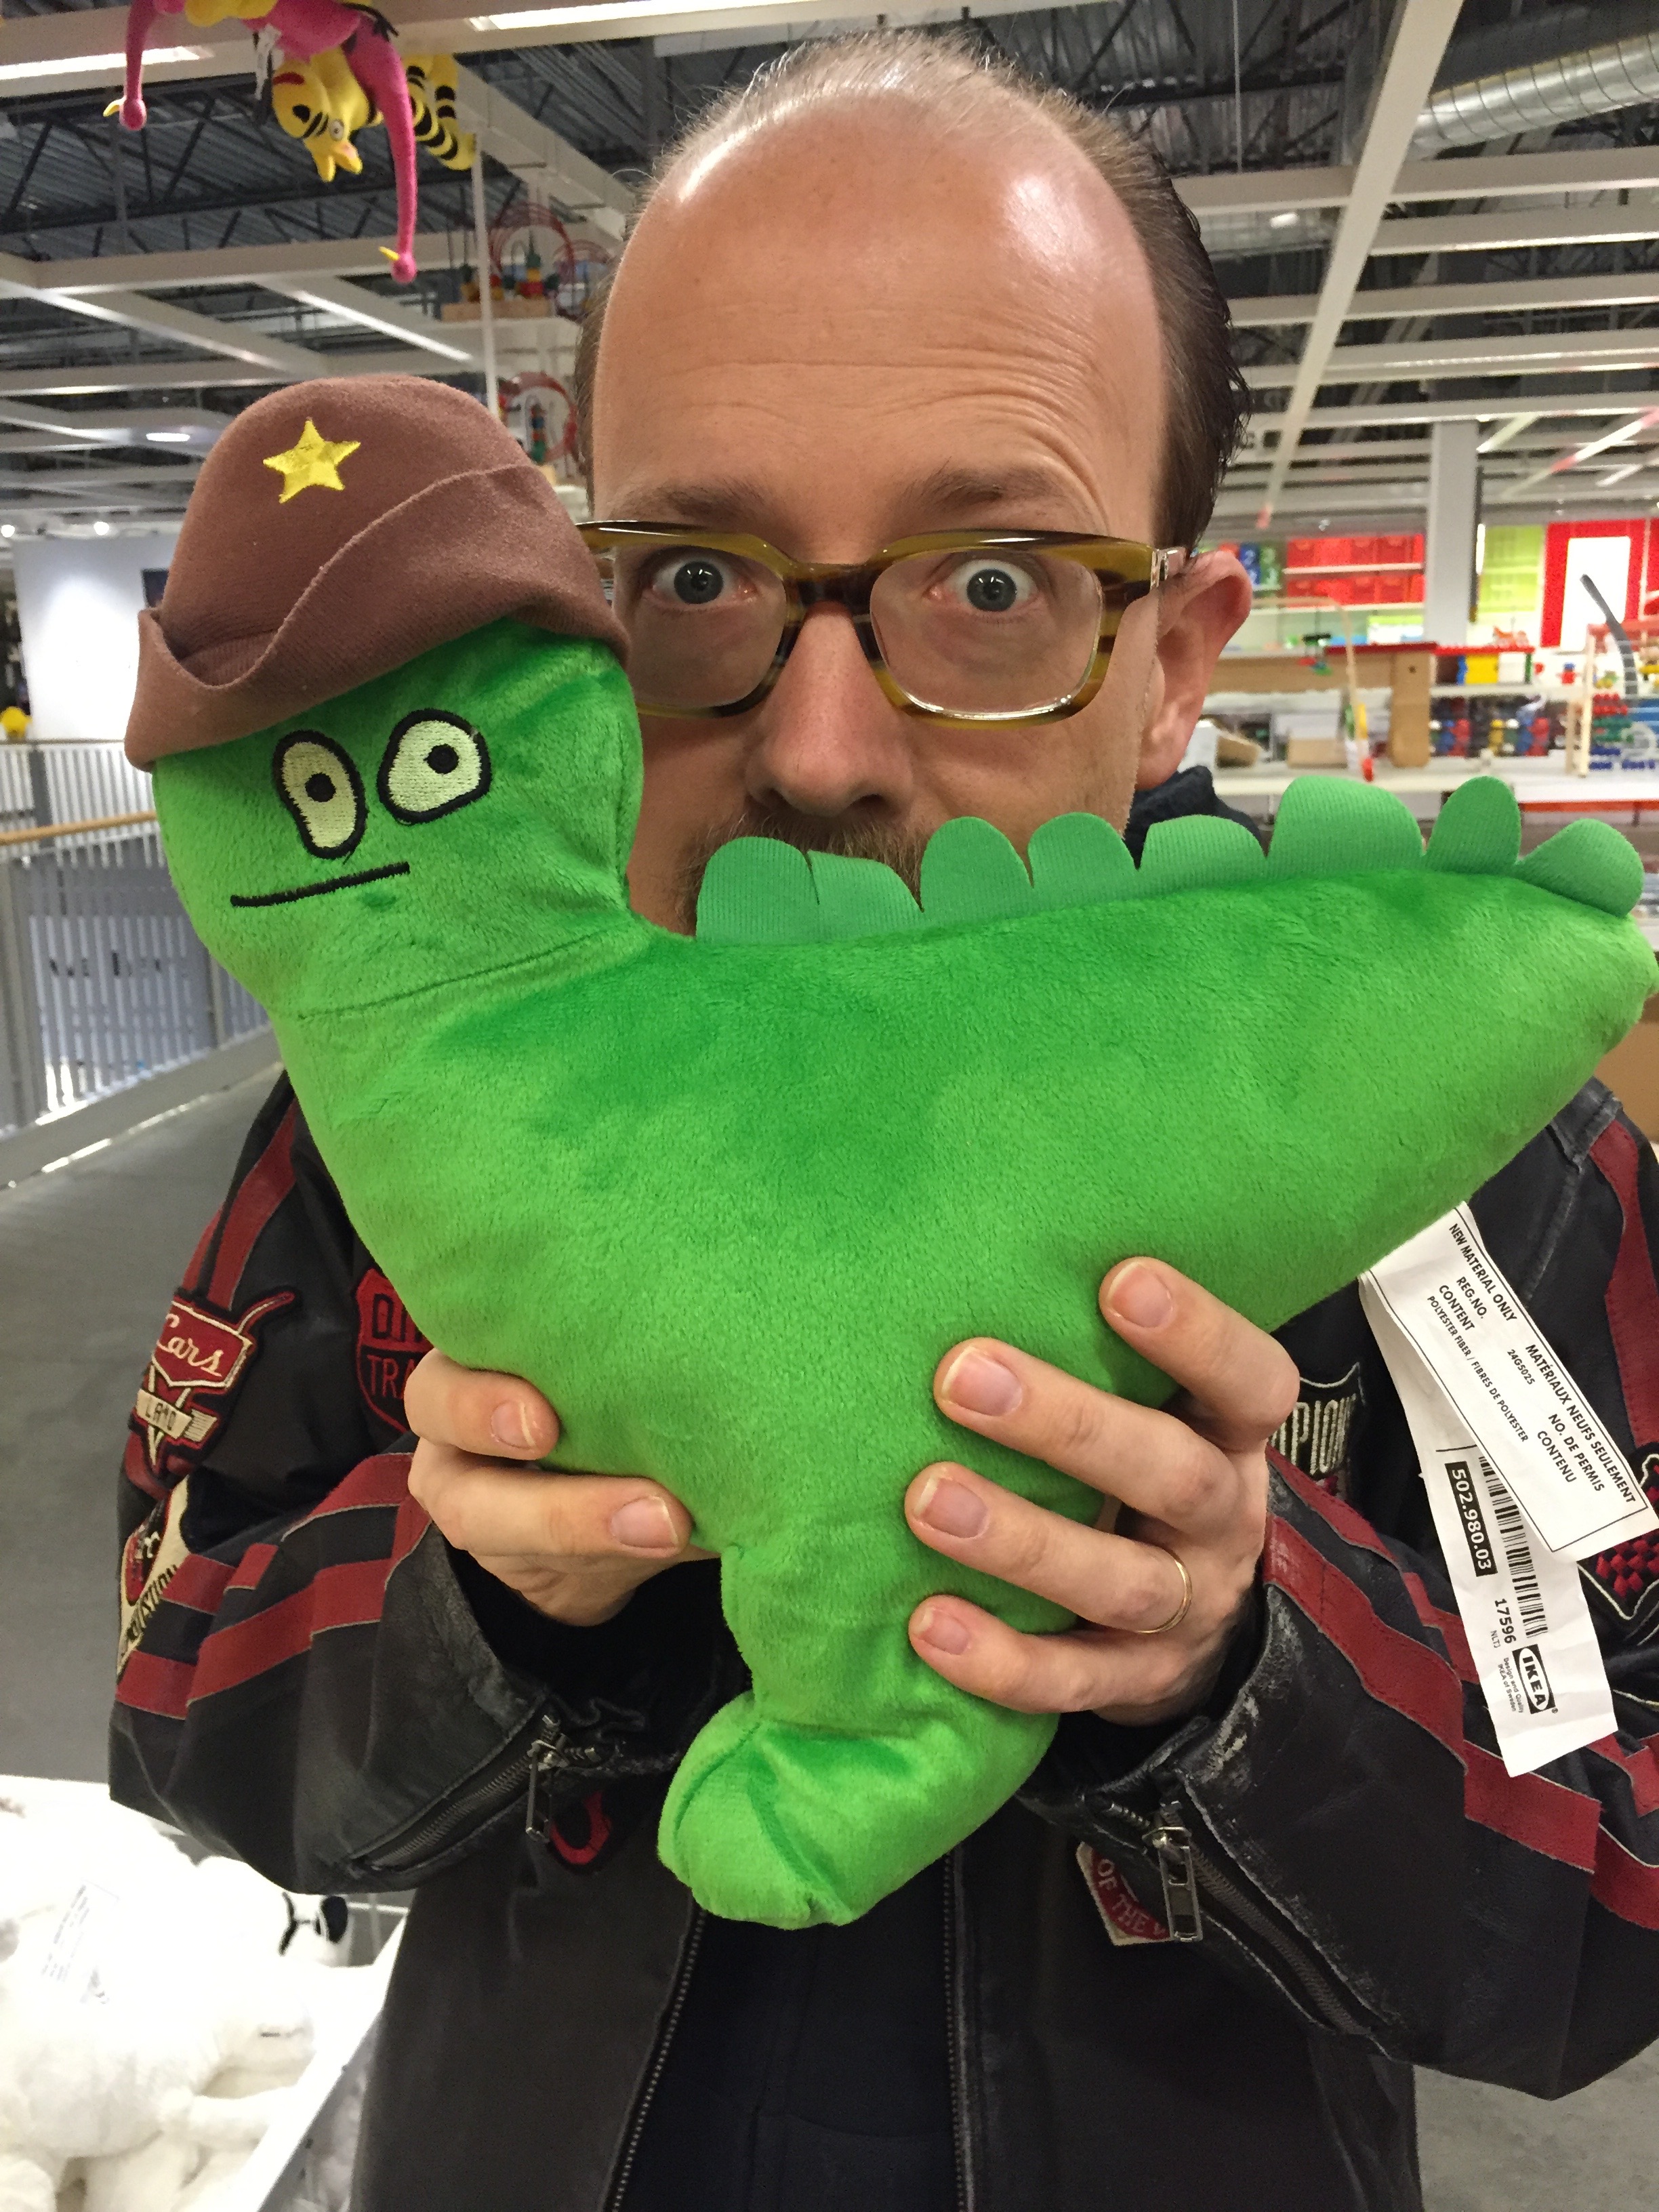 Photo of James Hicks posing with a green dinosaur plush toy